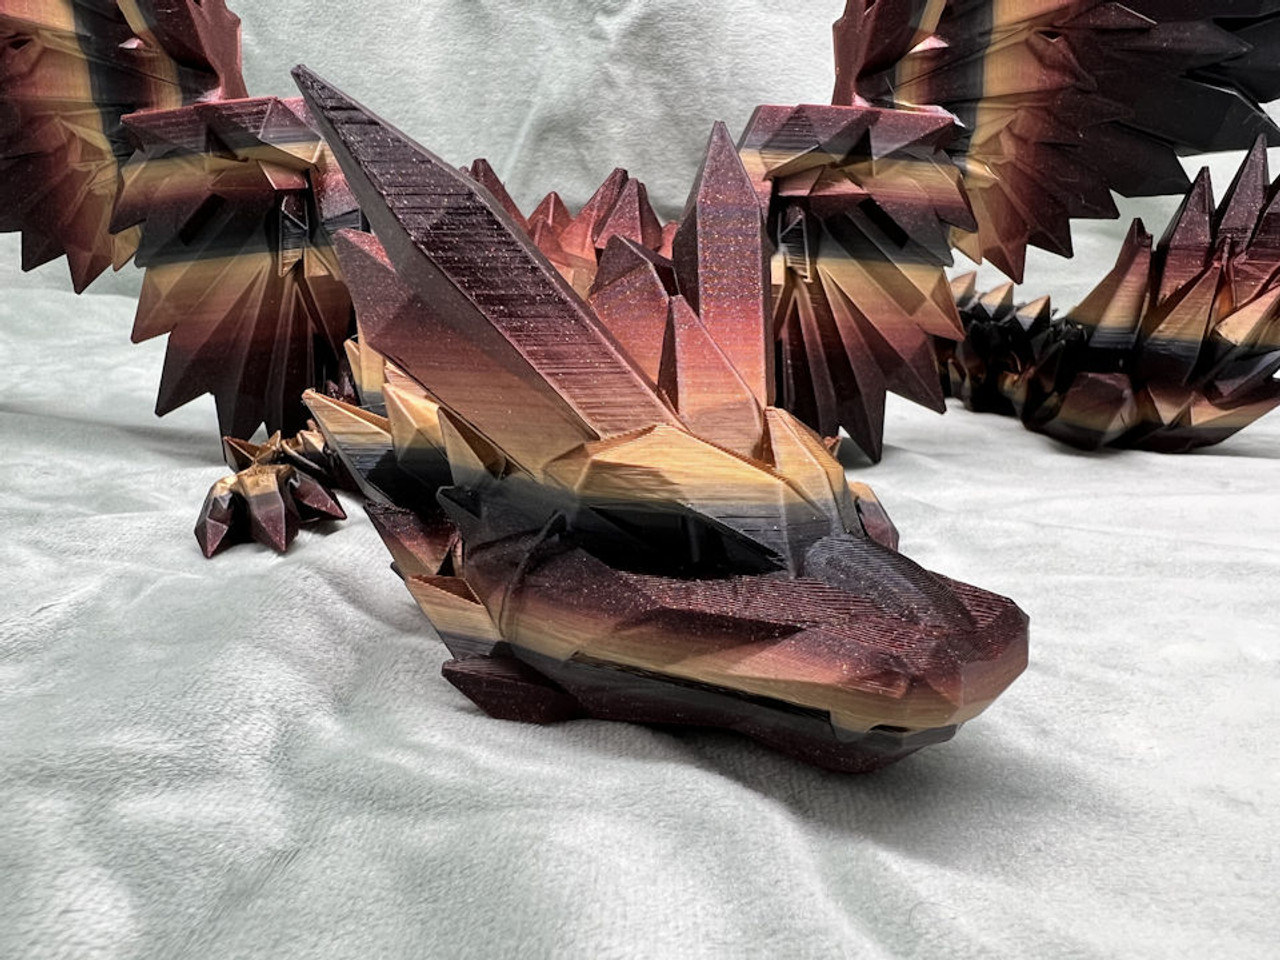 3D Printable Crystalwing BABY Dragon by Cinderwing3D